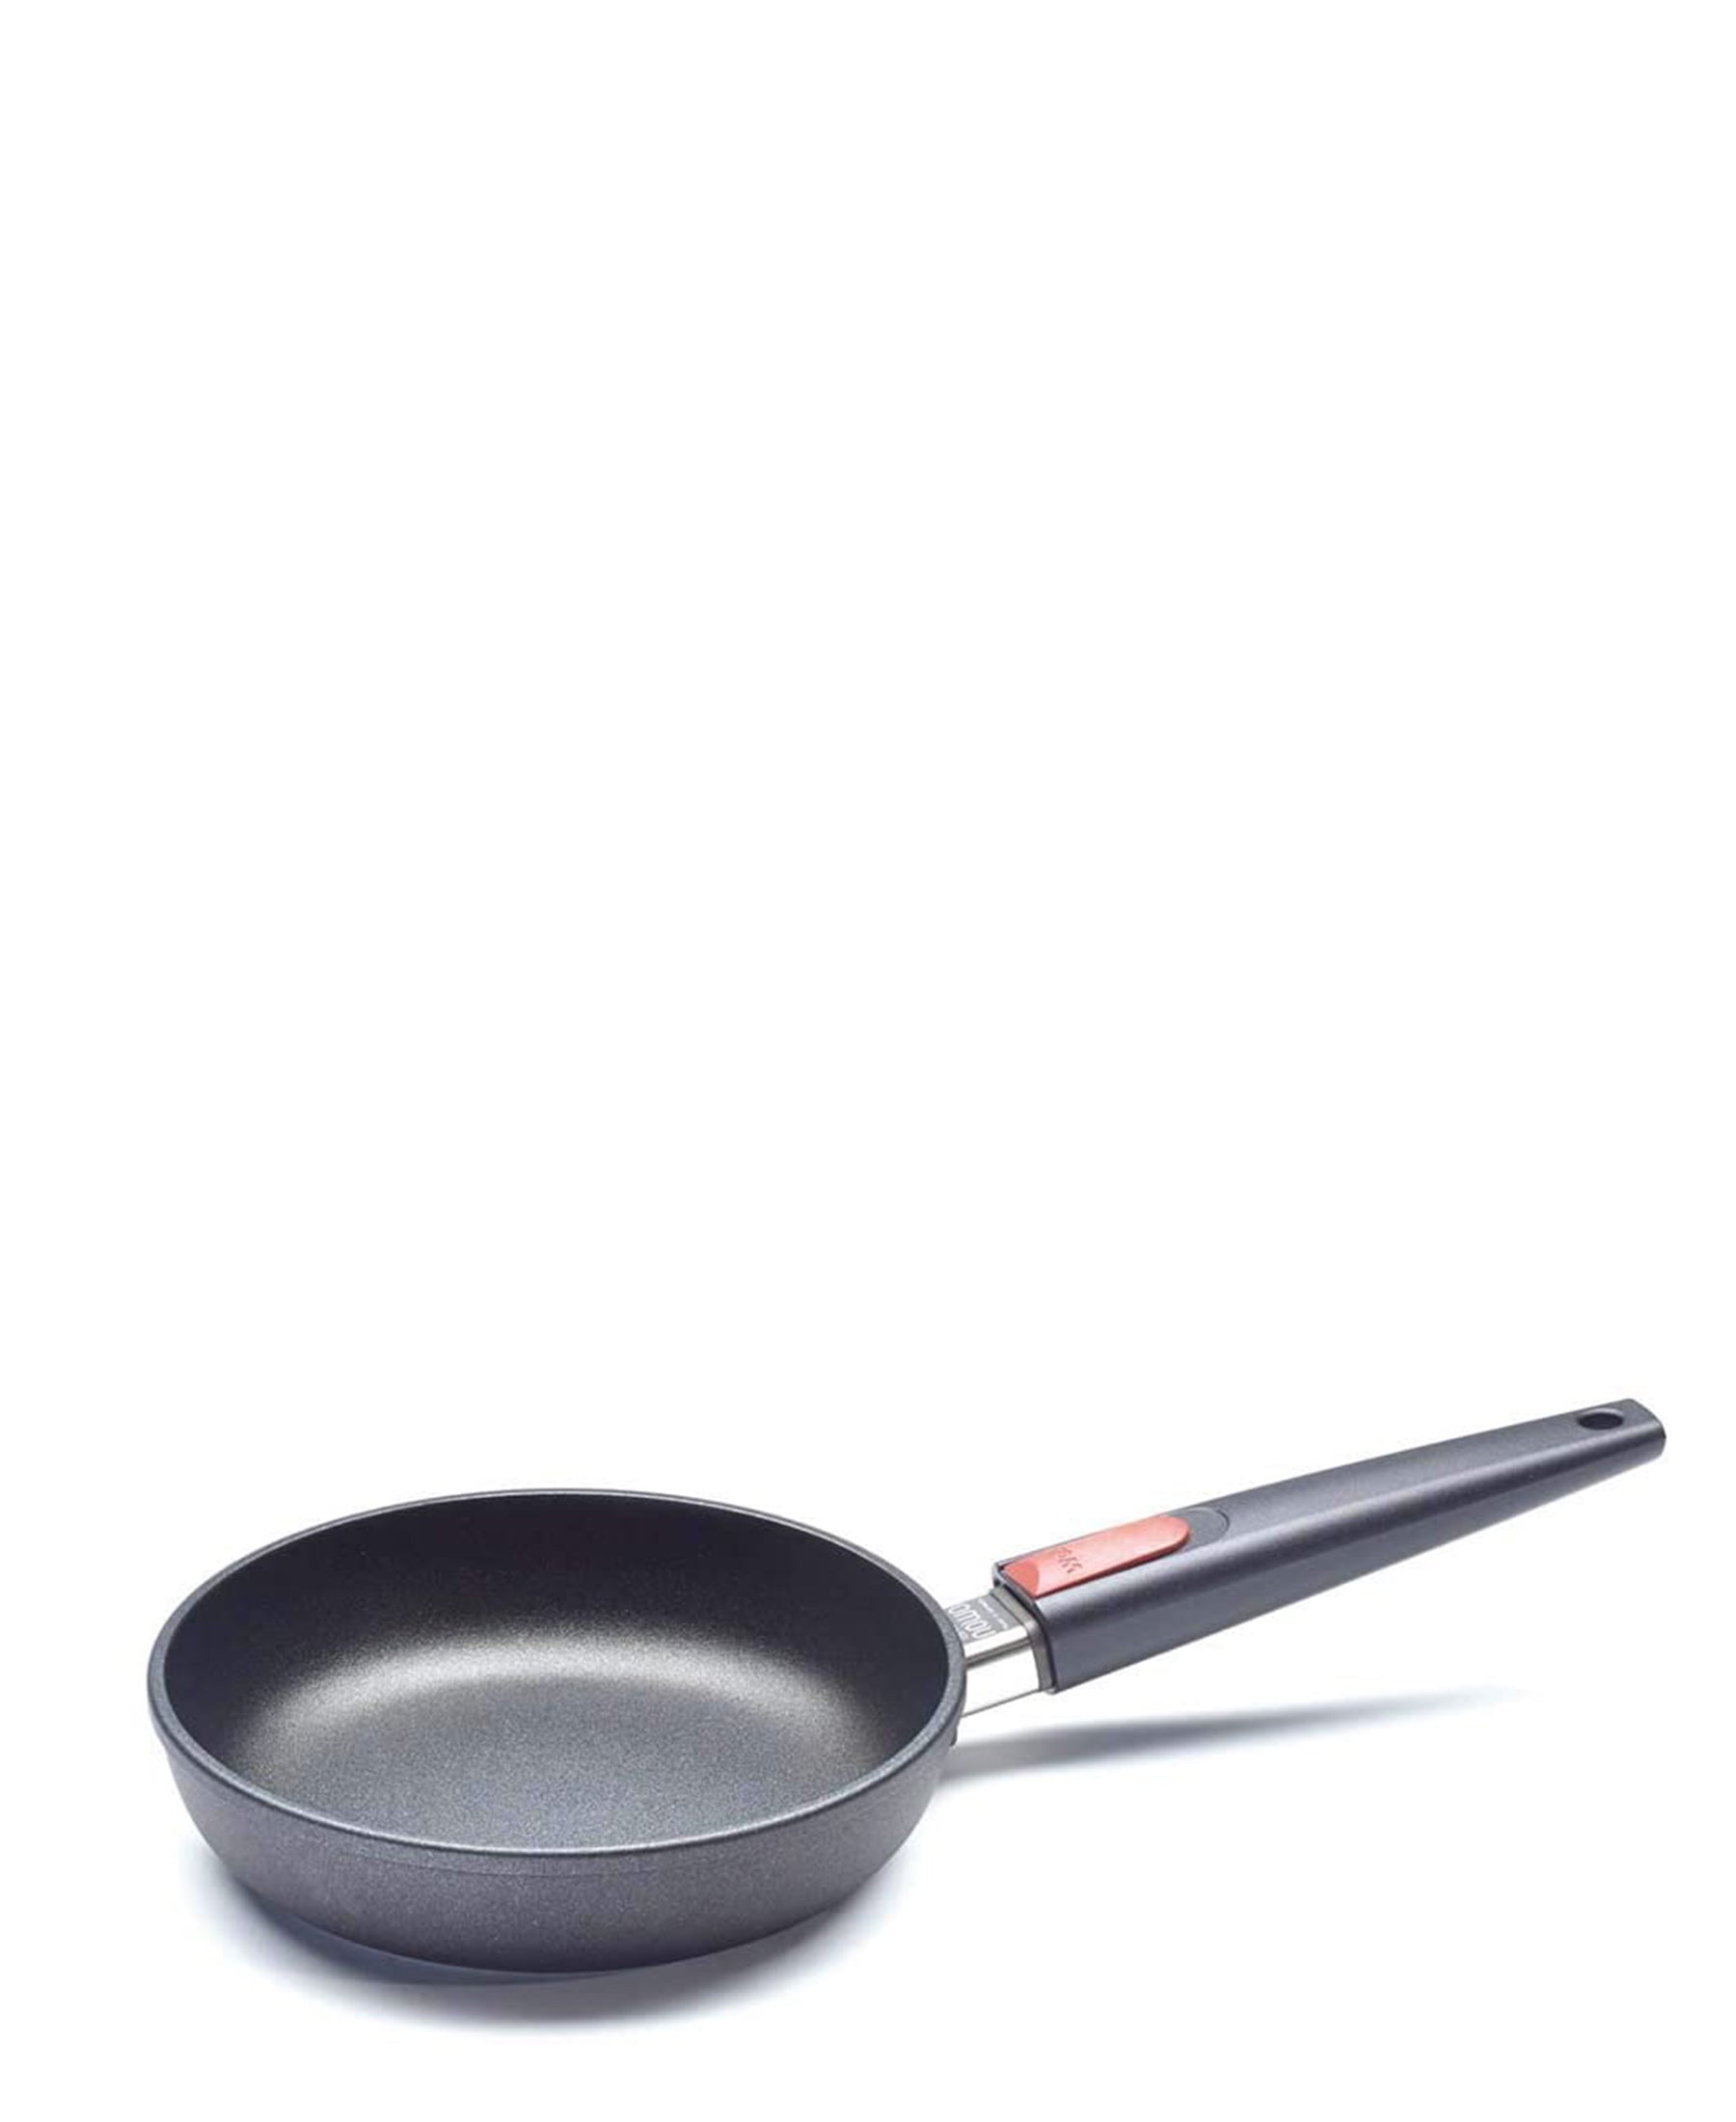 WOLL Cast-Iron Square 11x11in Nowo Titanium Induction Frying Pan